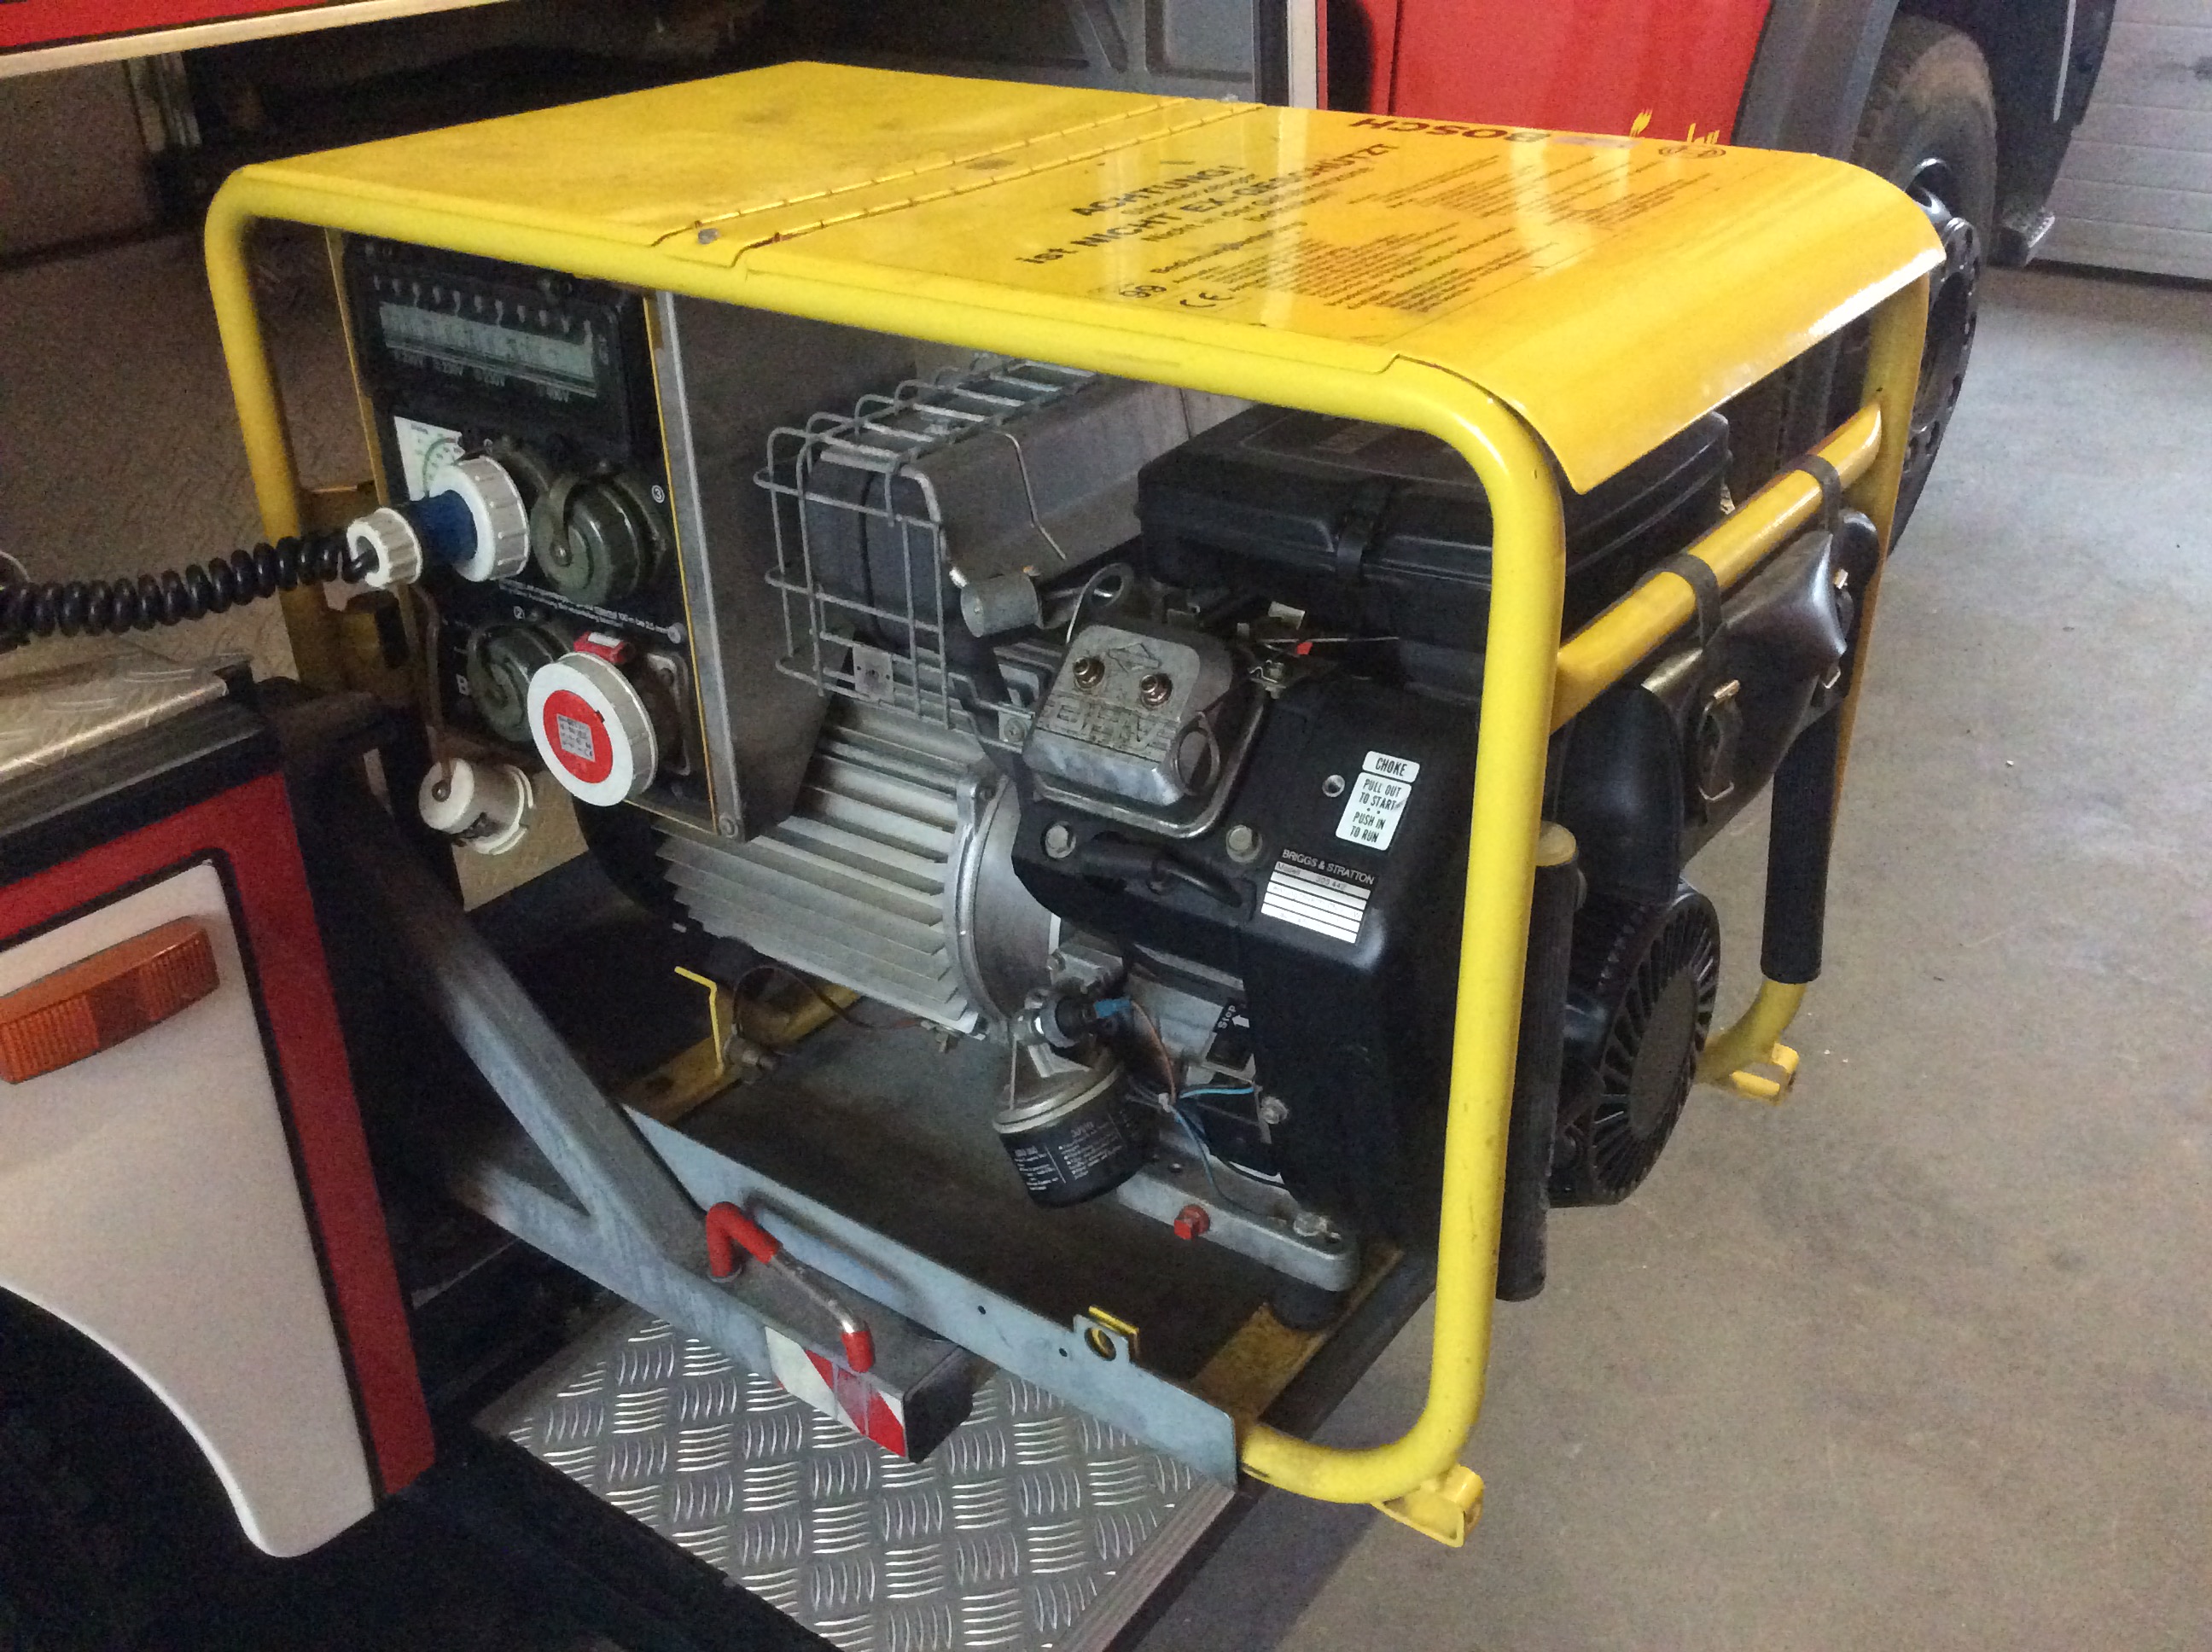 Towable Generators for commercial and industrial use